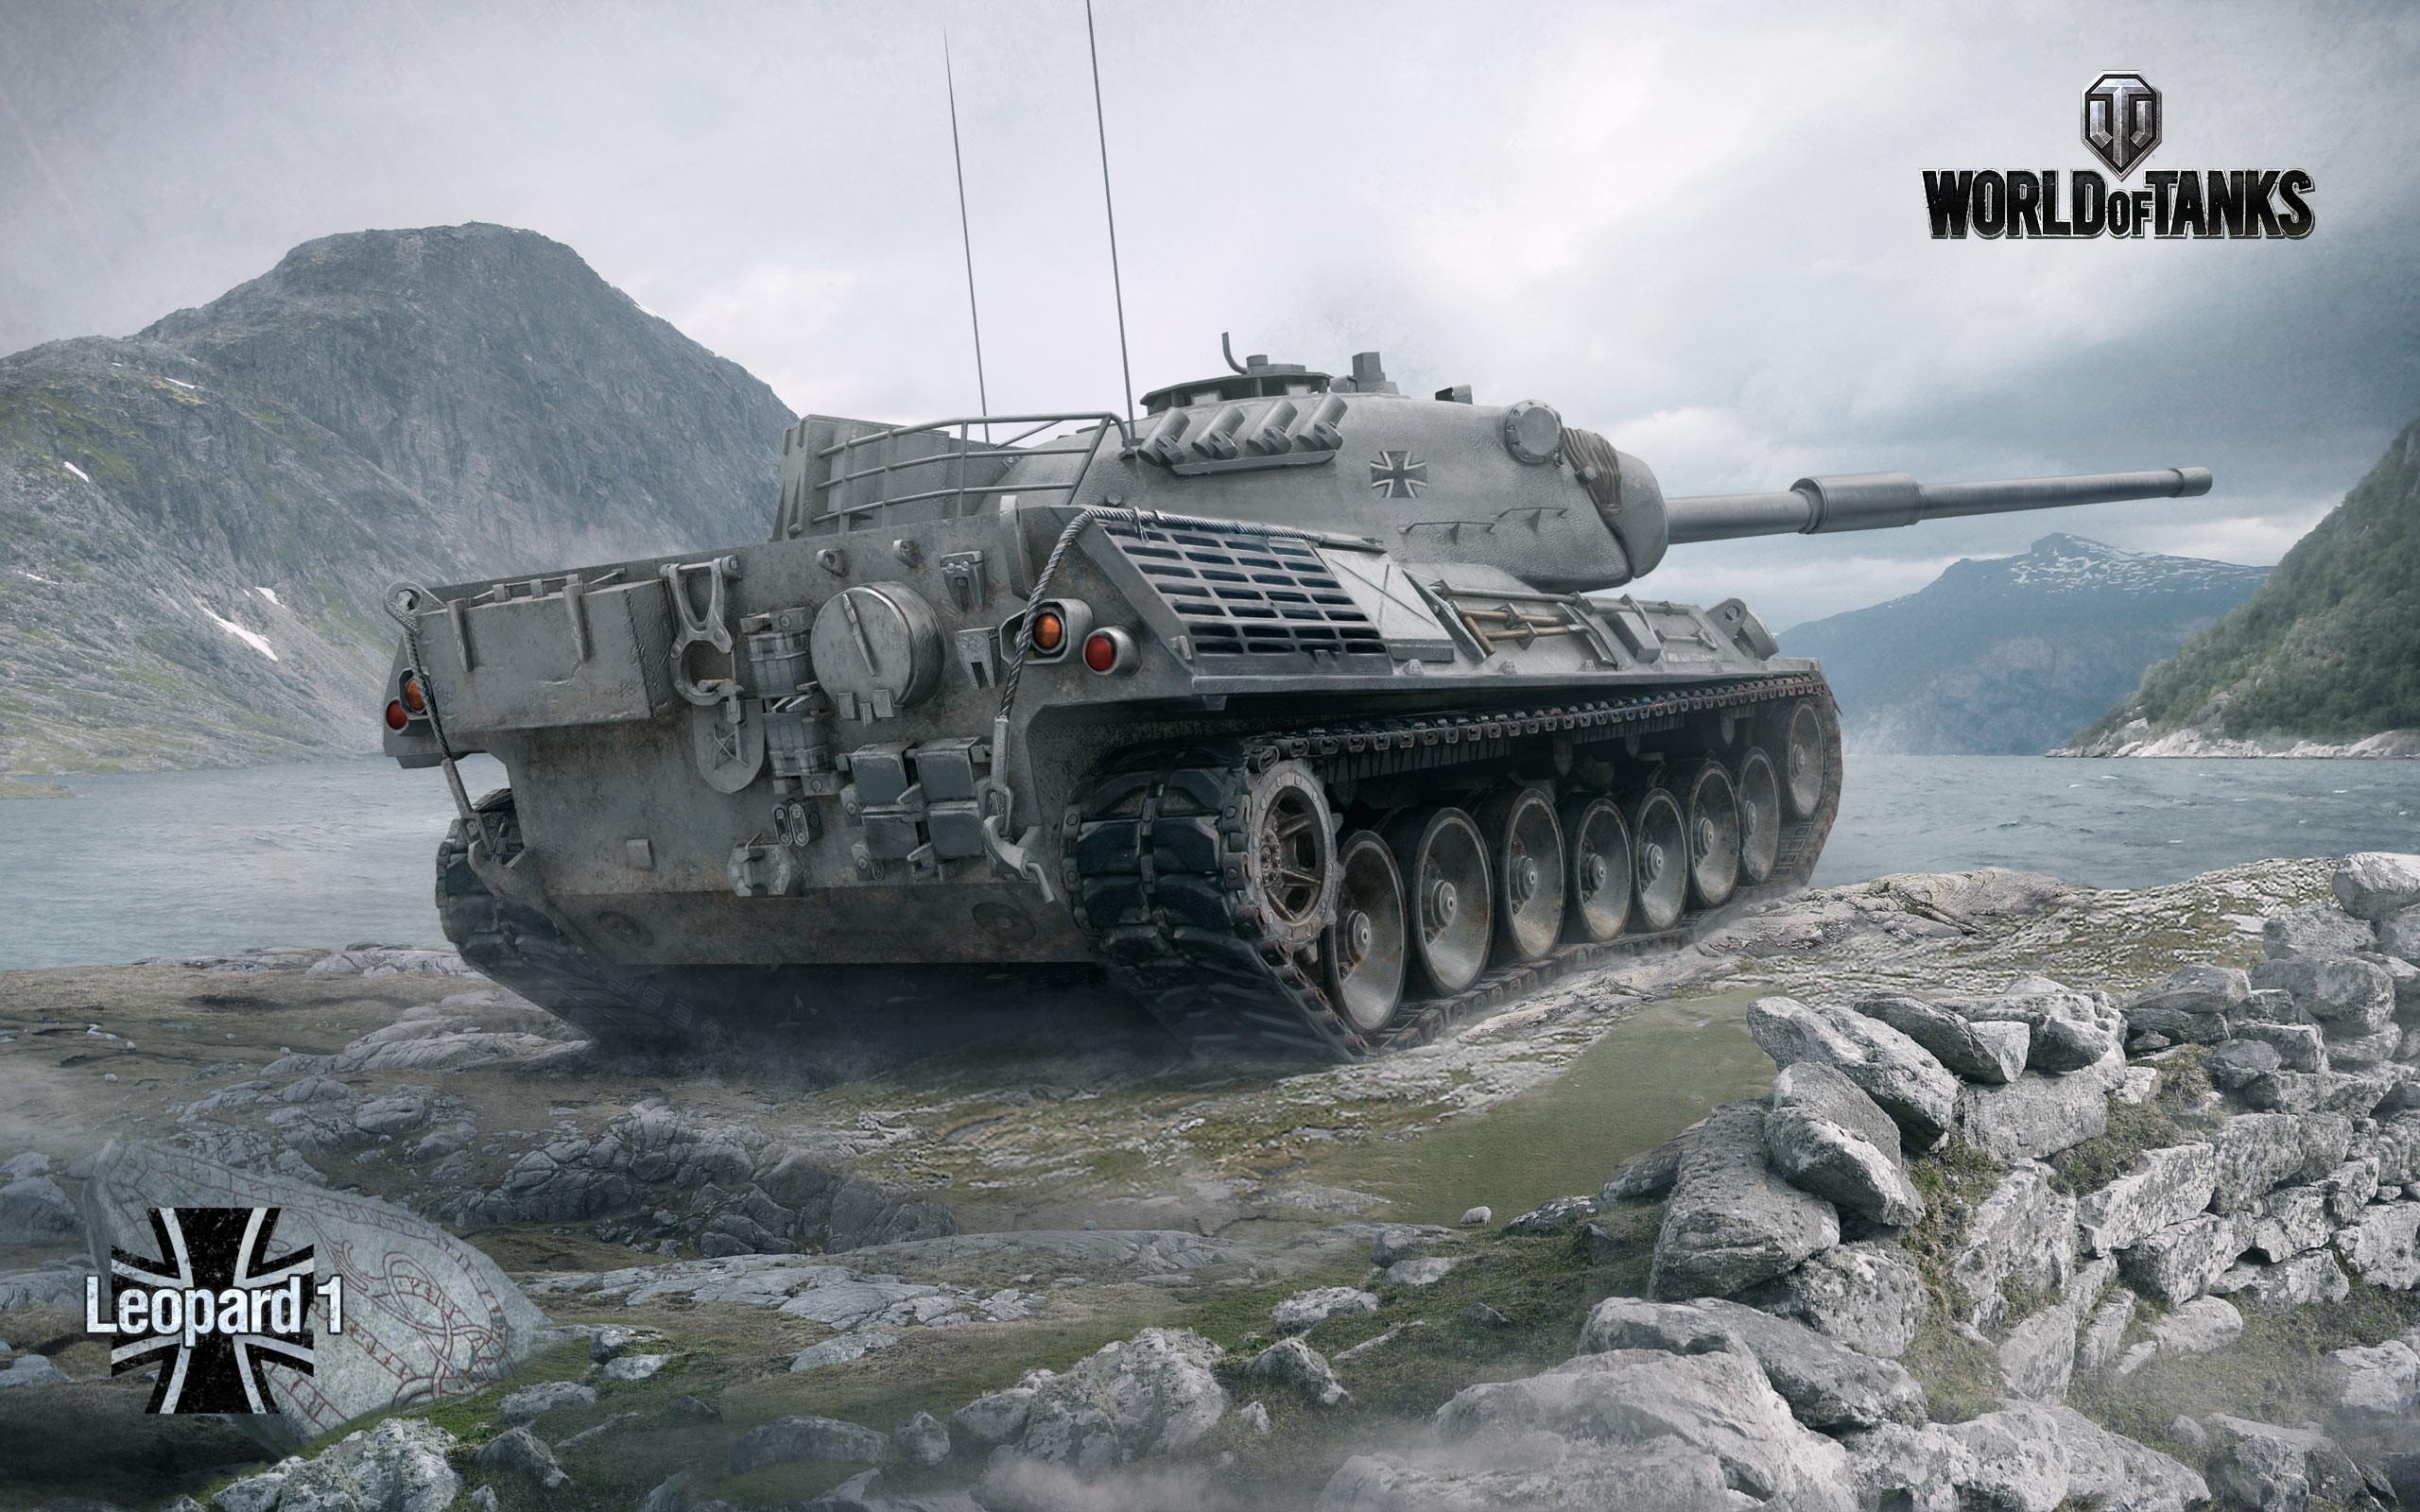 General 2560x1600 tank World of Tanks Leopard 1 wargaming video games PC gaming vehicle video game art military military vehicle